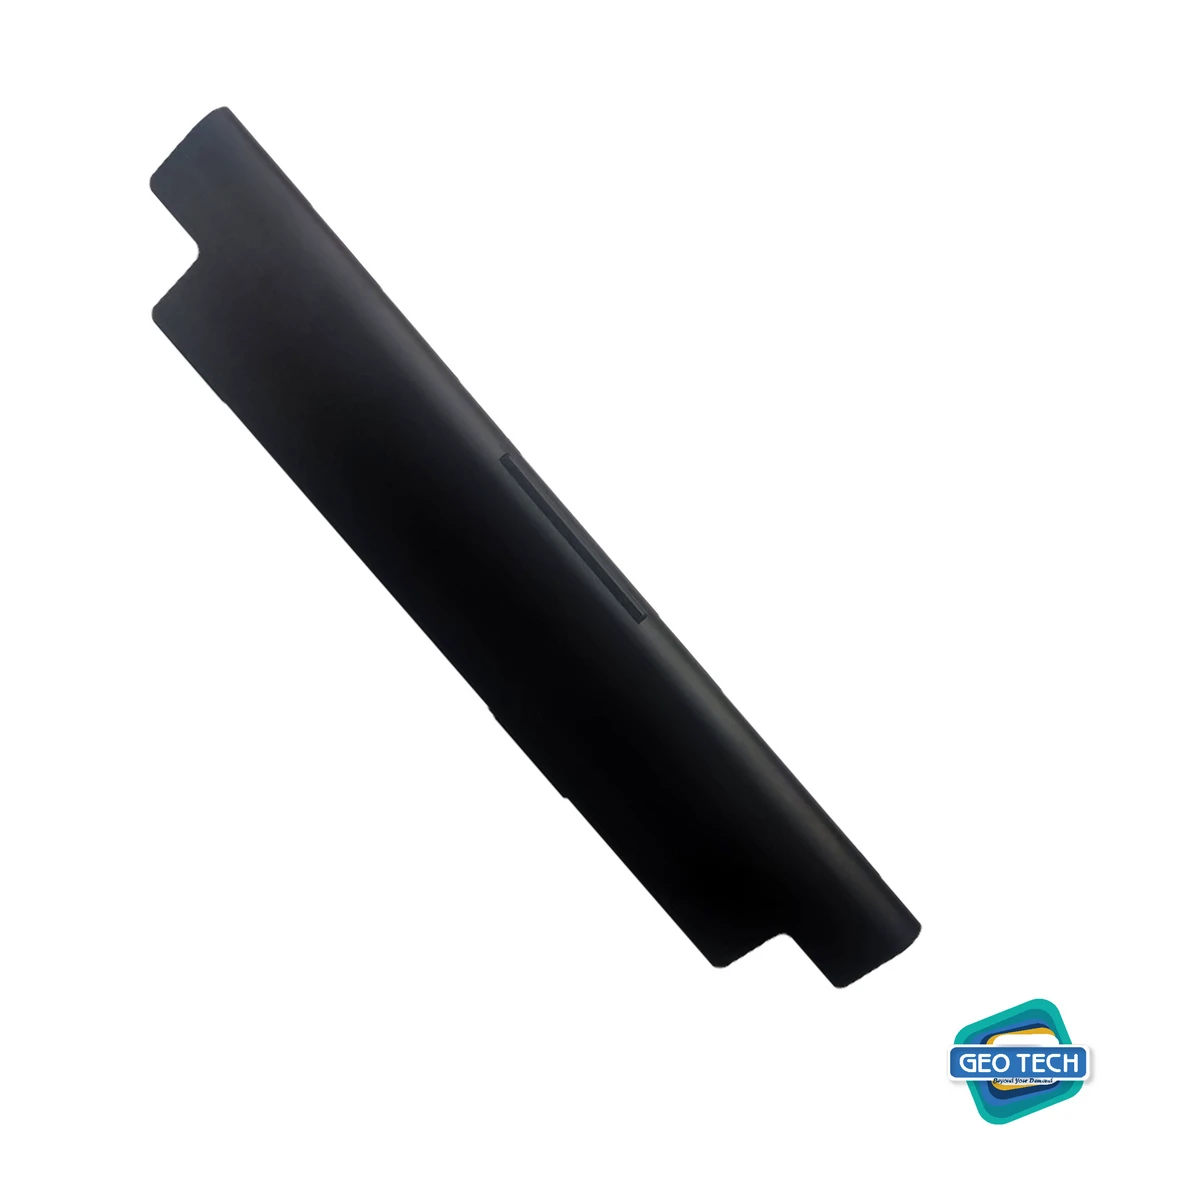 LAPTOP BATTERY FOR DELL 3421 / 5421 / 3437 /5437/ 5421/ 15- 3521